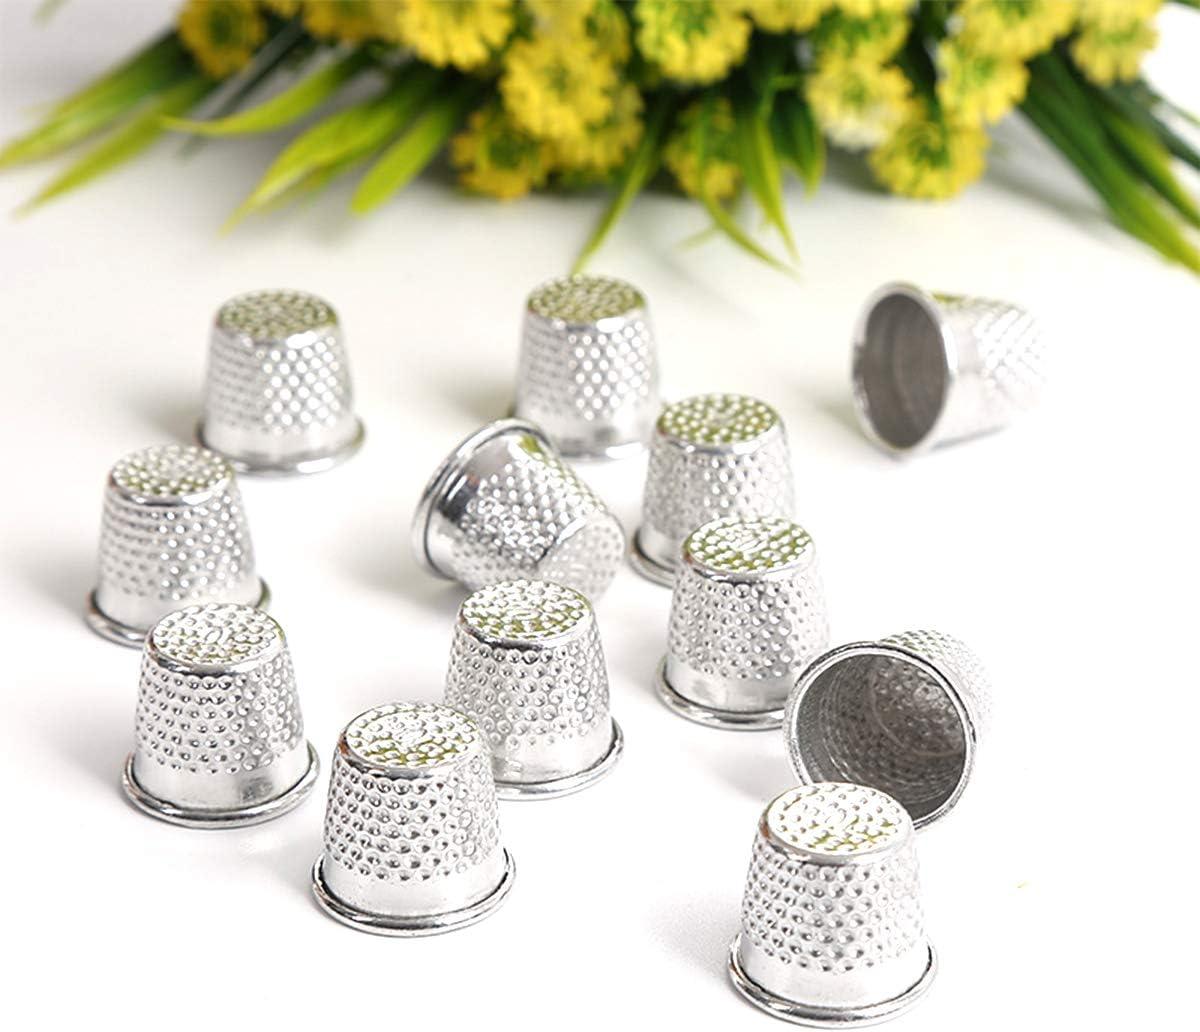  VILLCASE 15pcs Sewing Thimble Finger Thimble Coin Thimble Pads  Needle Finger Protector Thumb Protector Leather Thimble Embroidery Tools  Needlework Thimbles Sewing Finger Protector Iron Grip